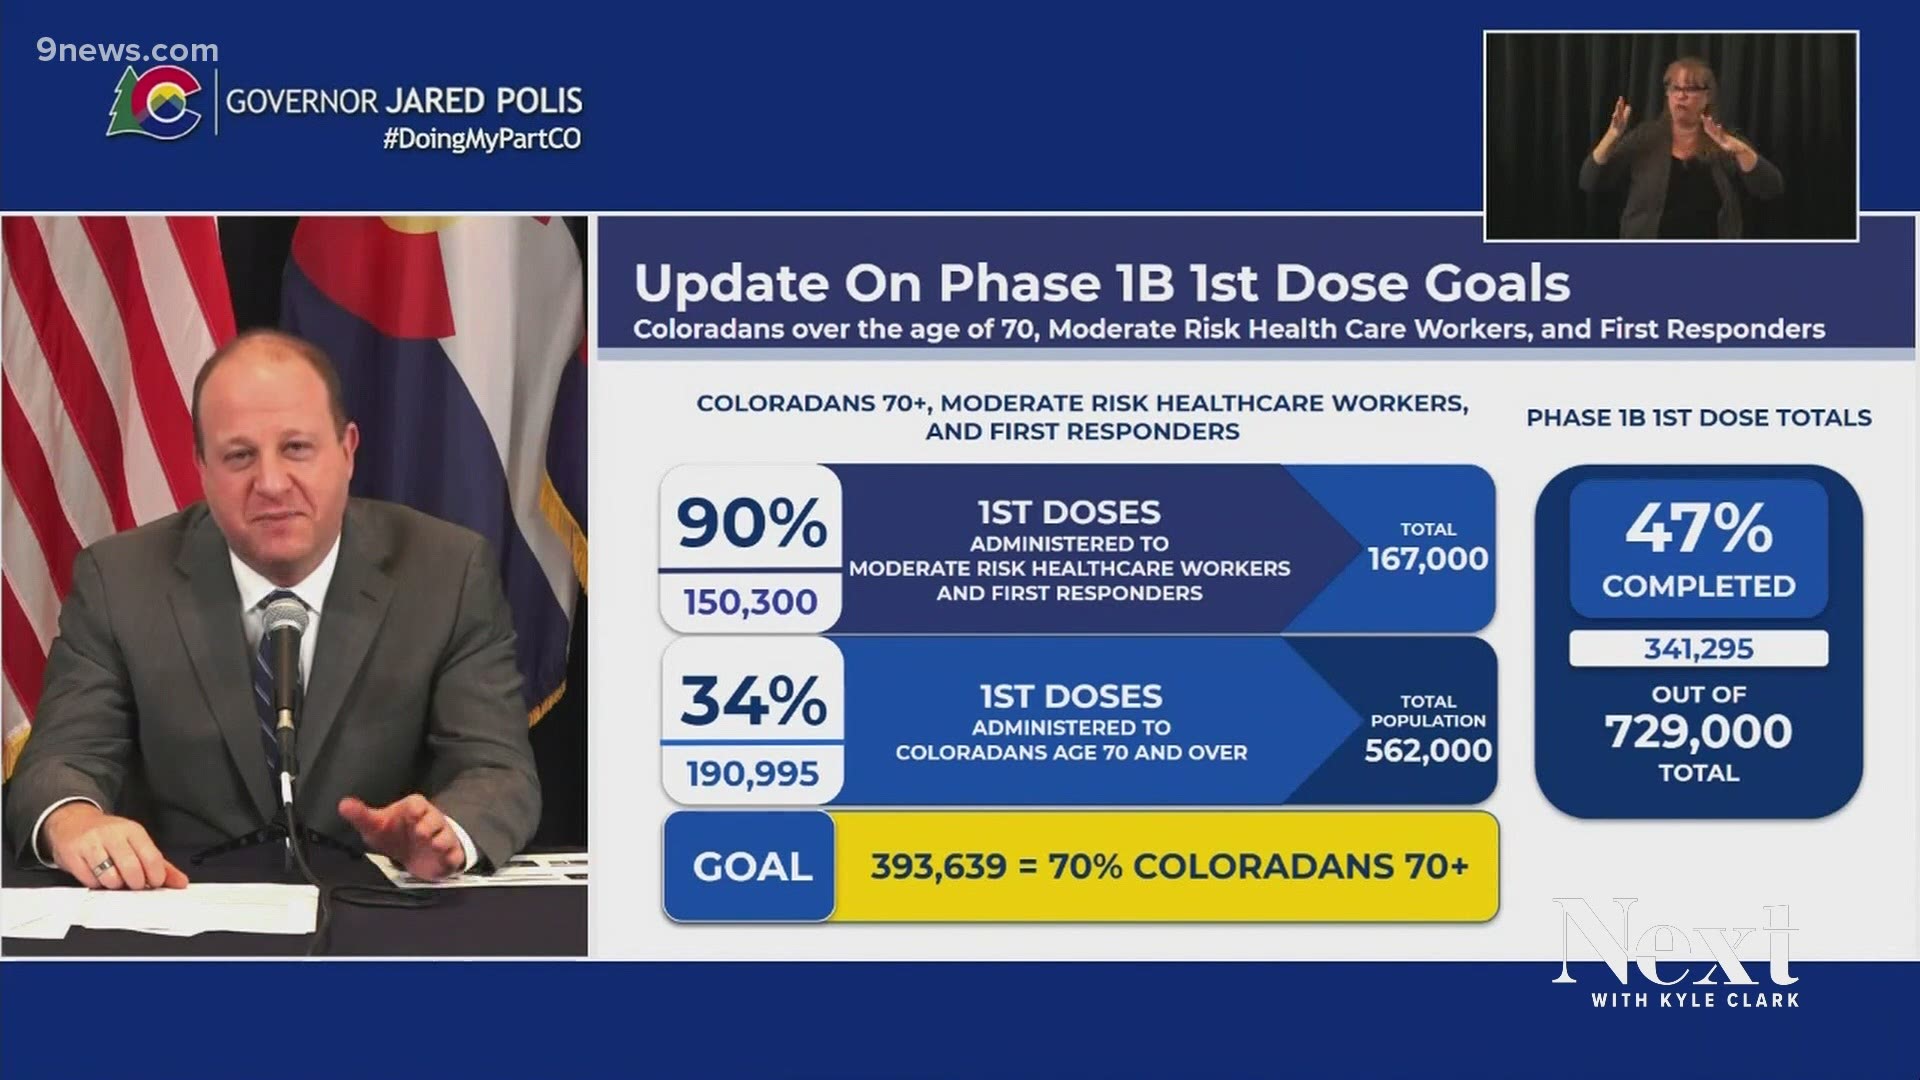 Governor Jared Polis says we cannot wait until every 70+ Coloradan is vaccinated before we move on to the next vaccination phase.